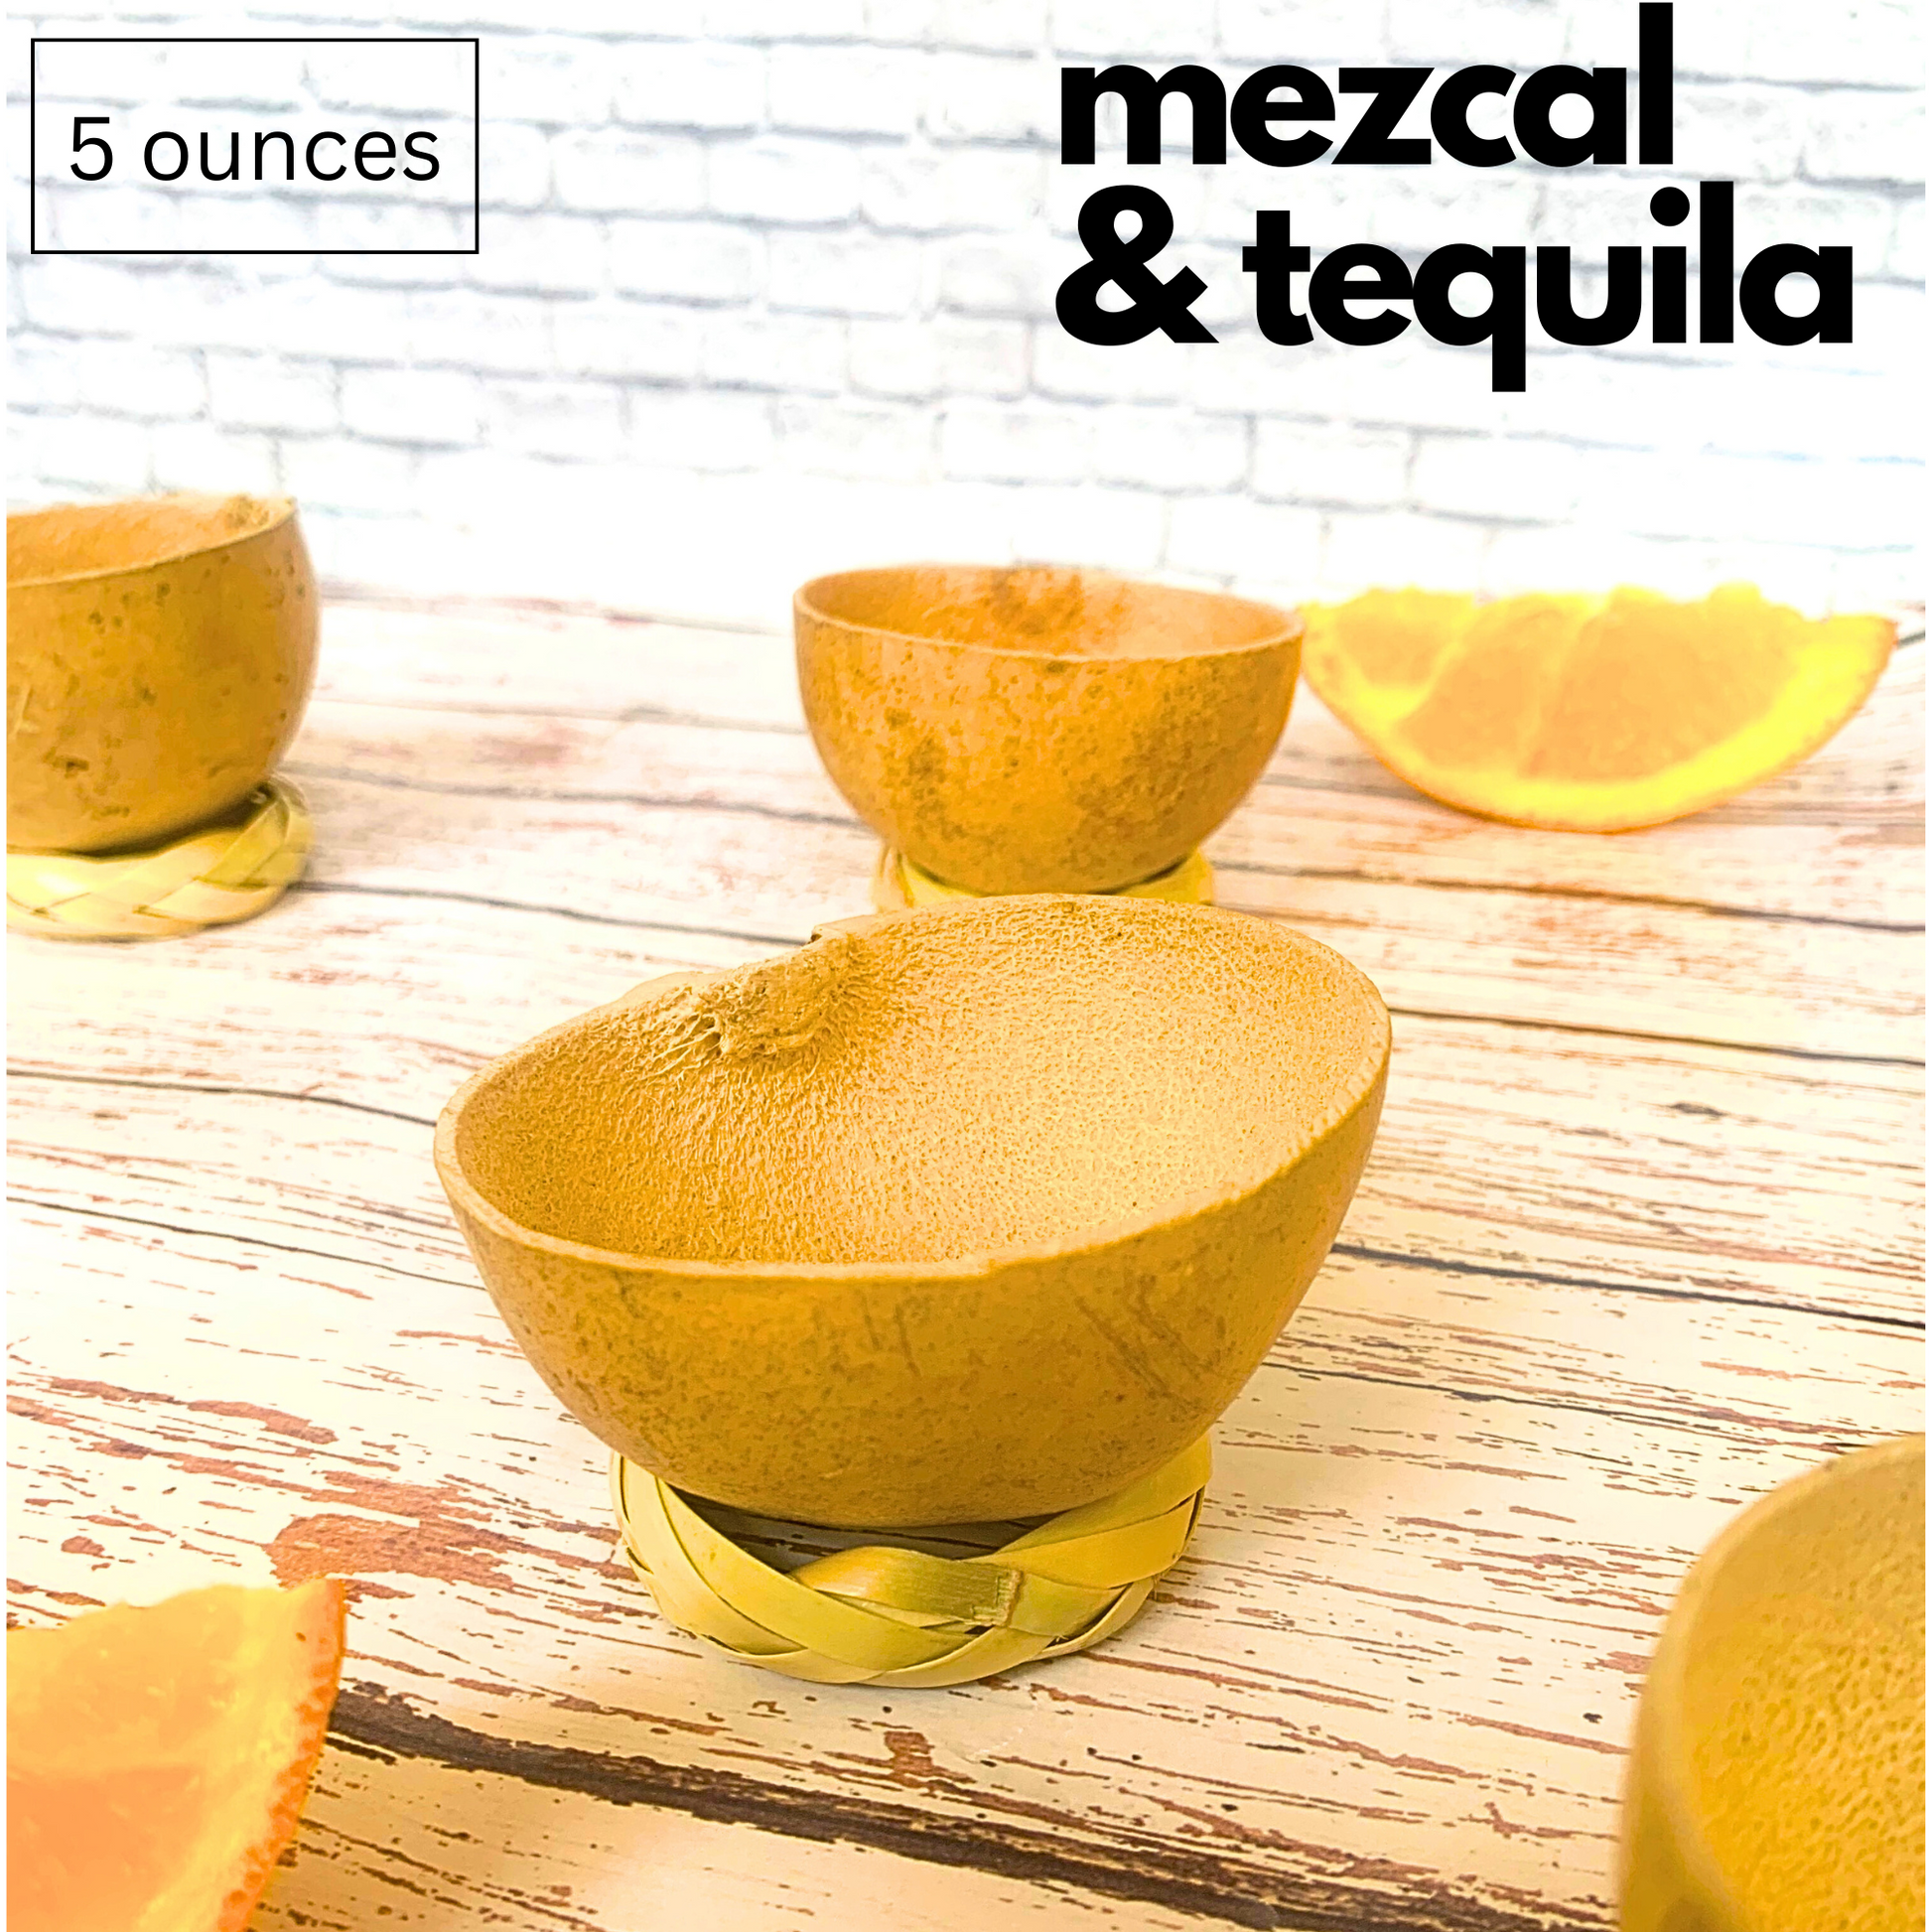 Handmade 5oz Mezcal Jicaras Cups from Mexico, perfect for enjoying agave spirits in a traditional manner, supporting sustainability for mezcal and tequila